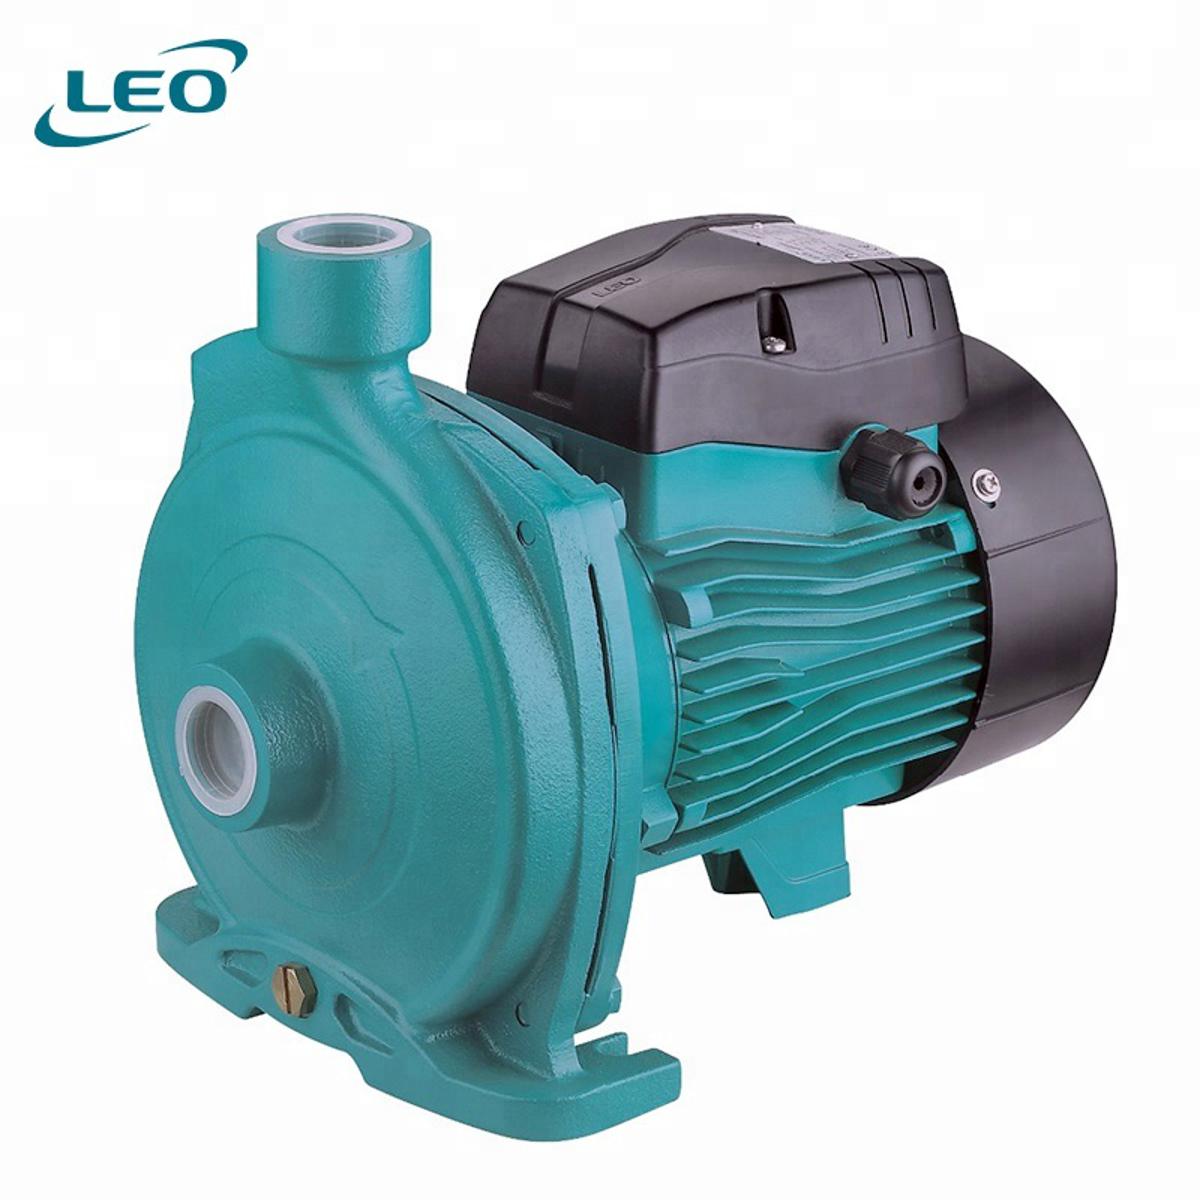 LEO - ACM-110- 1100 W - 1.5 HP- Clean Water Centrifugal Pump- 180V~220V SINGLE PHASE- SIZE:- 1.25" X 1"- ITALY Patent DESIGN European STANDARD